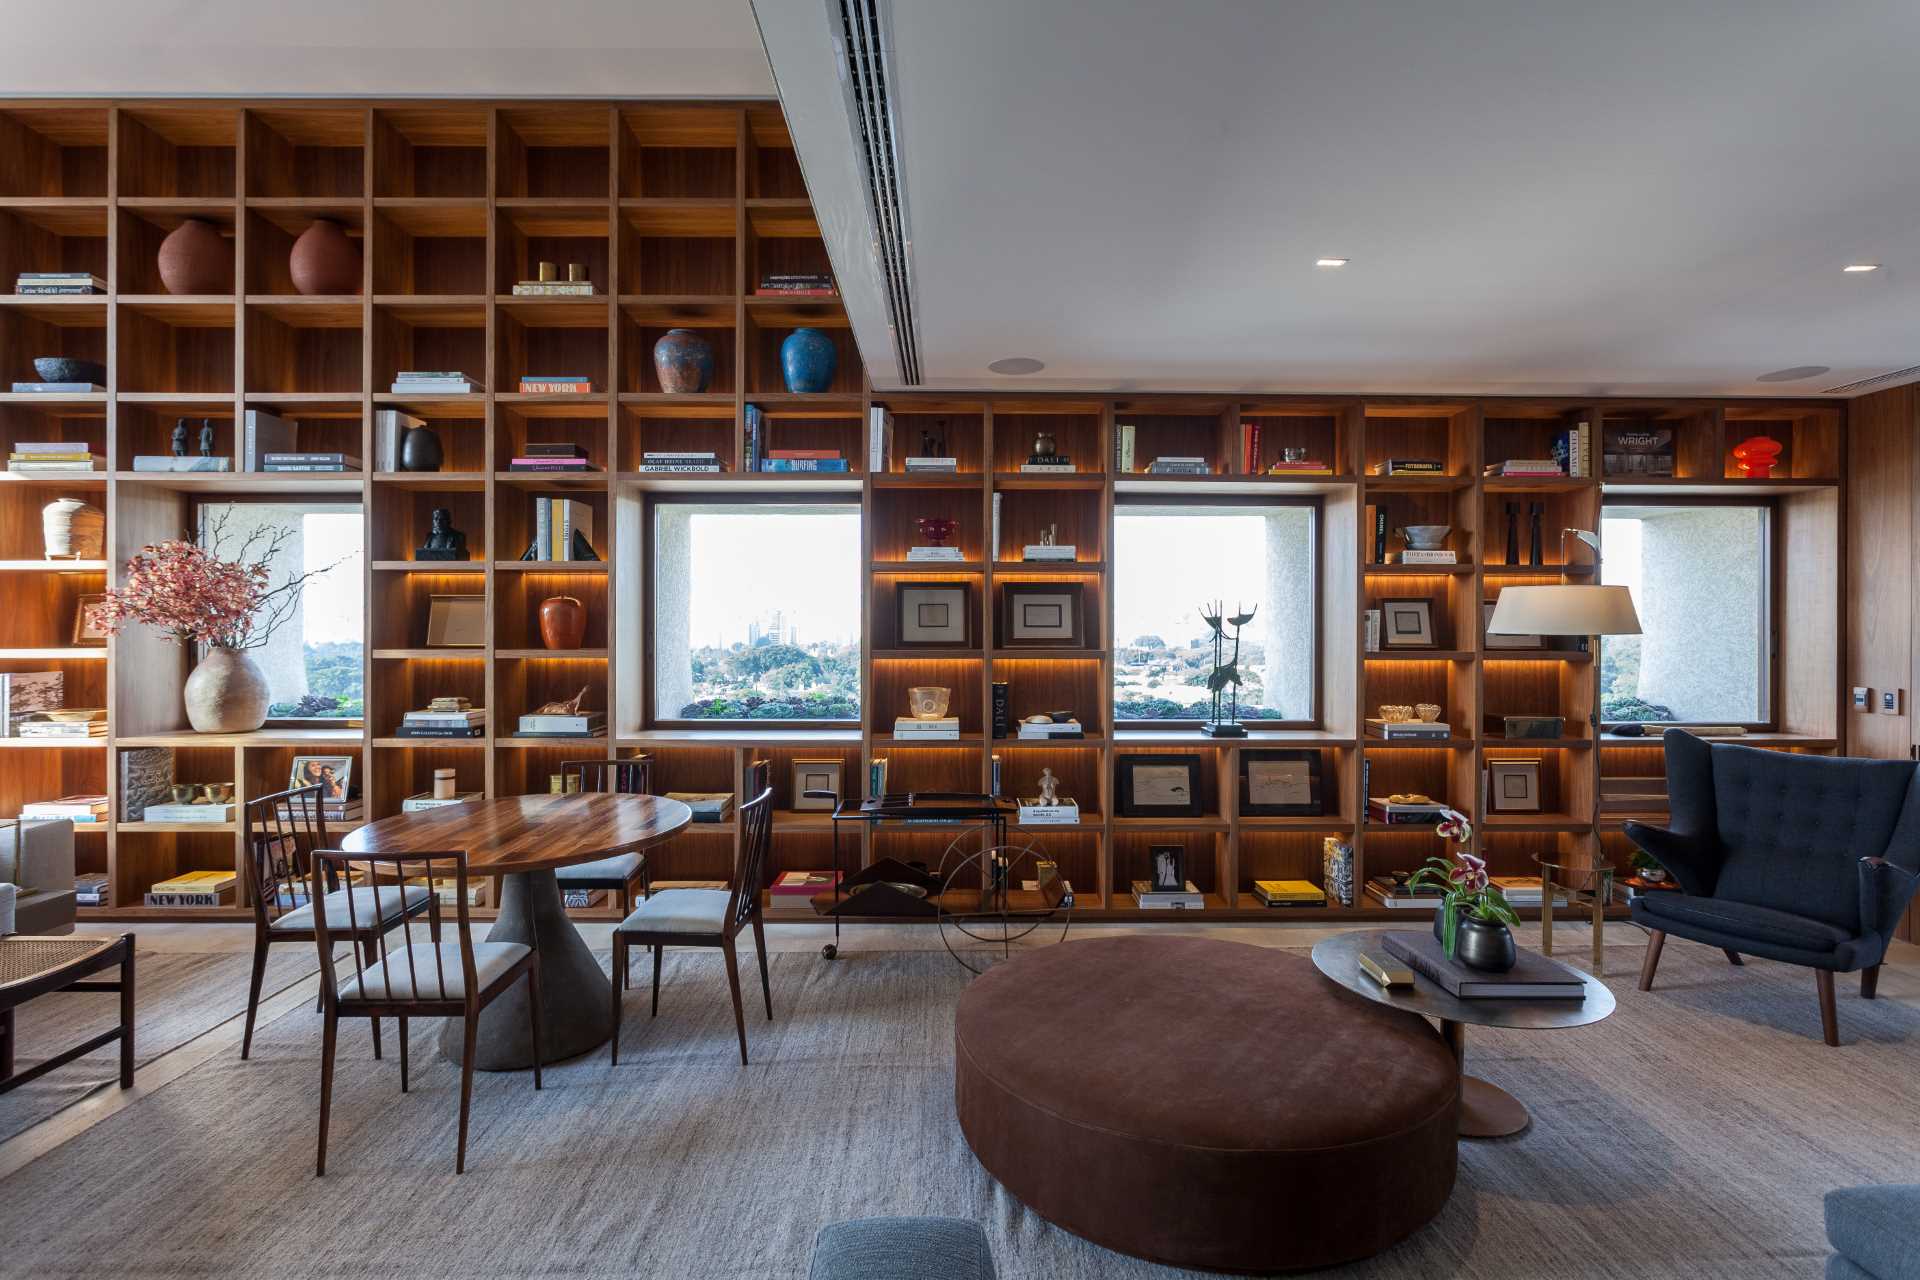 The design of this bookshelf allows the focus to be on the multiple windows that also share the wall, with the shelves framing the windows as if they were paintings.